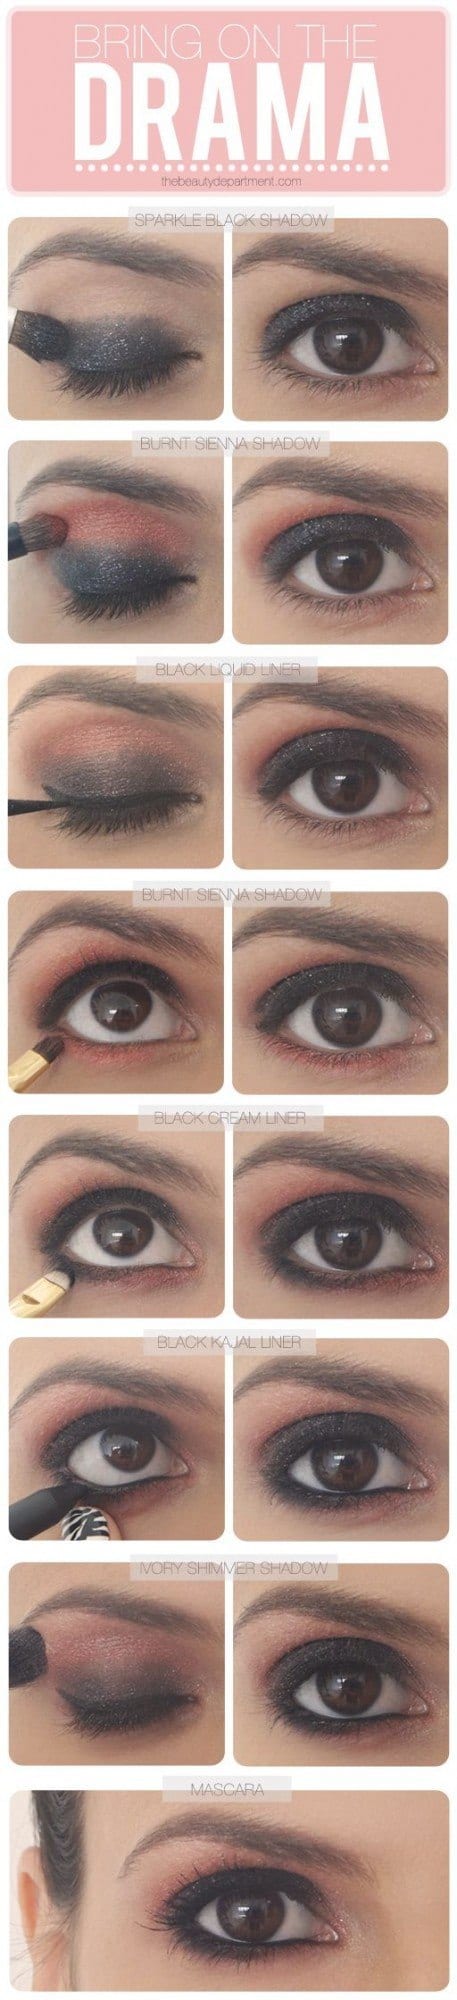 15 Easy and Stylish Eye Makeup Tutorials - How to wear Eye Makeup?#